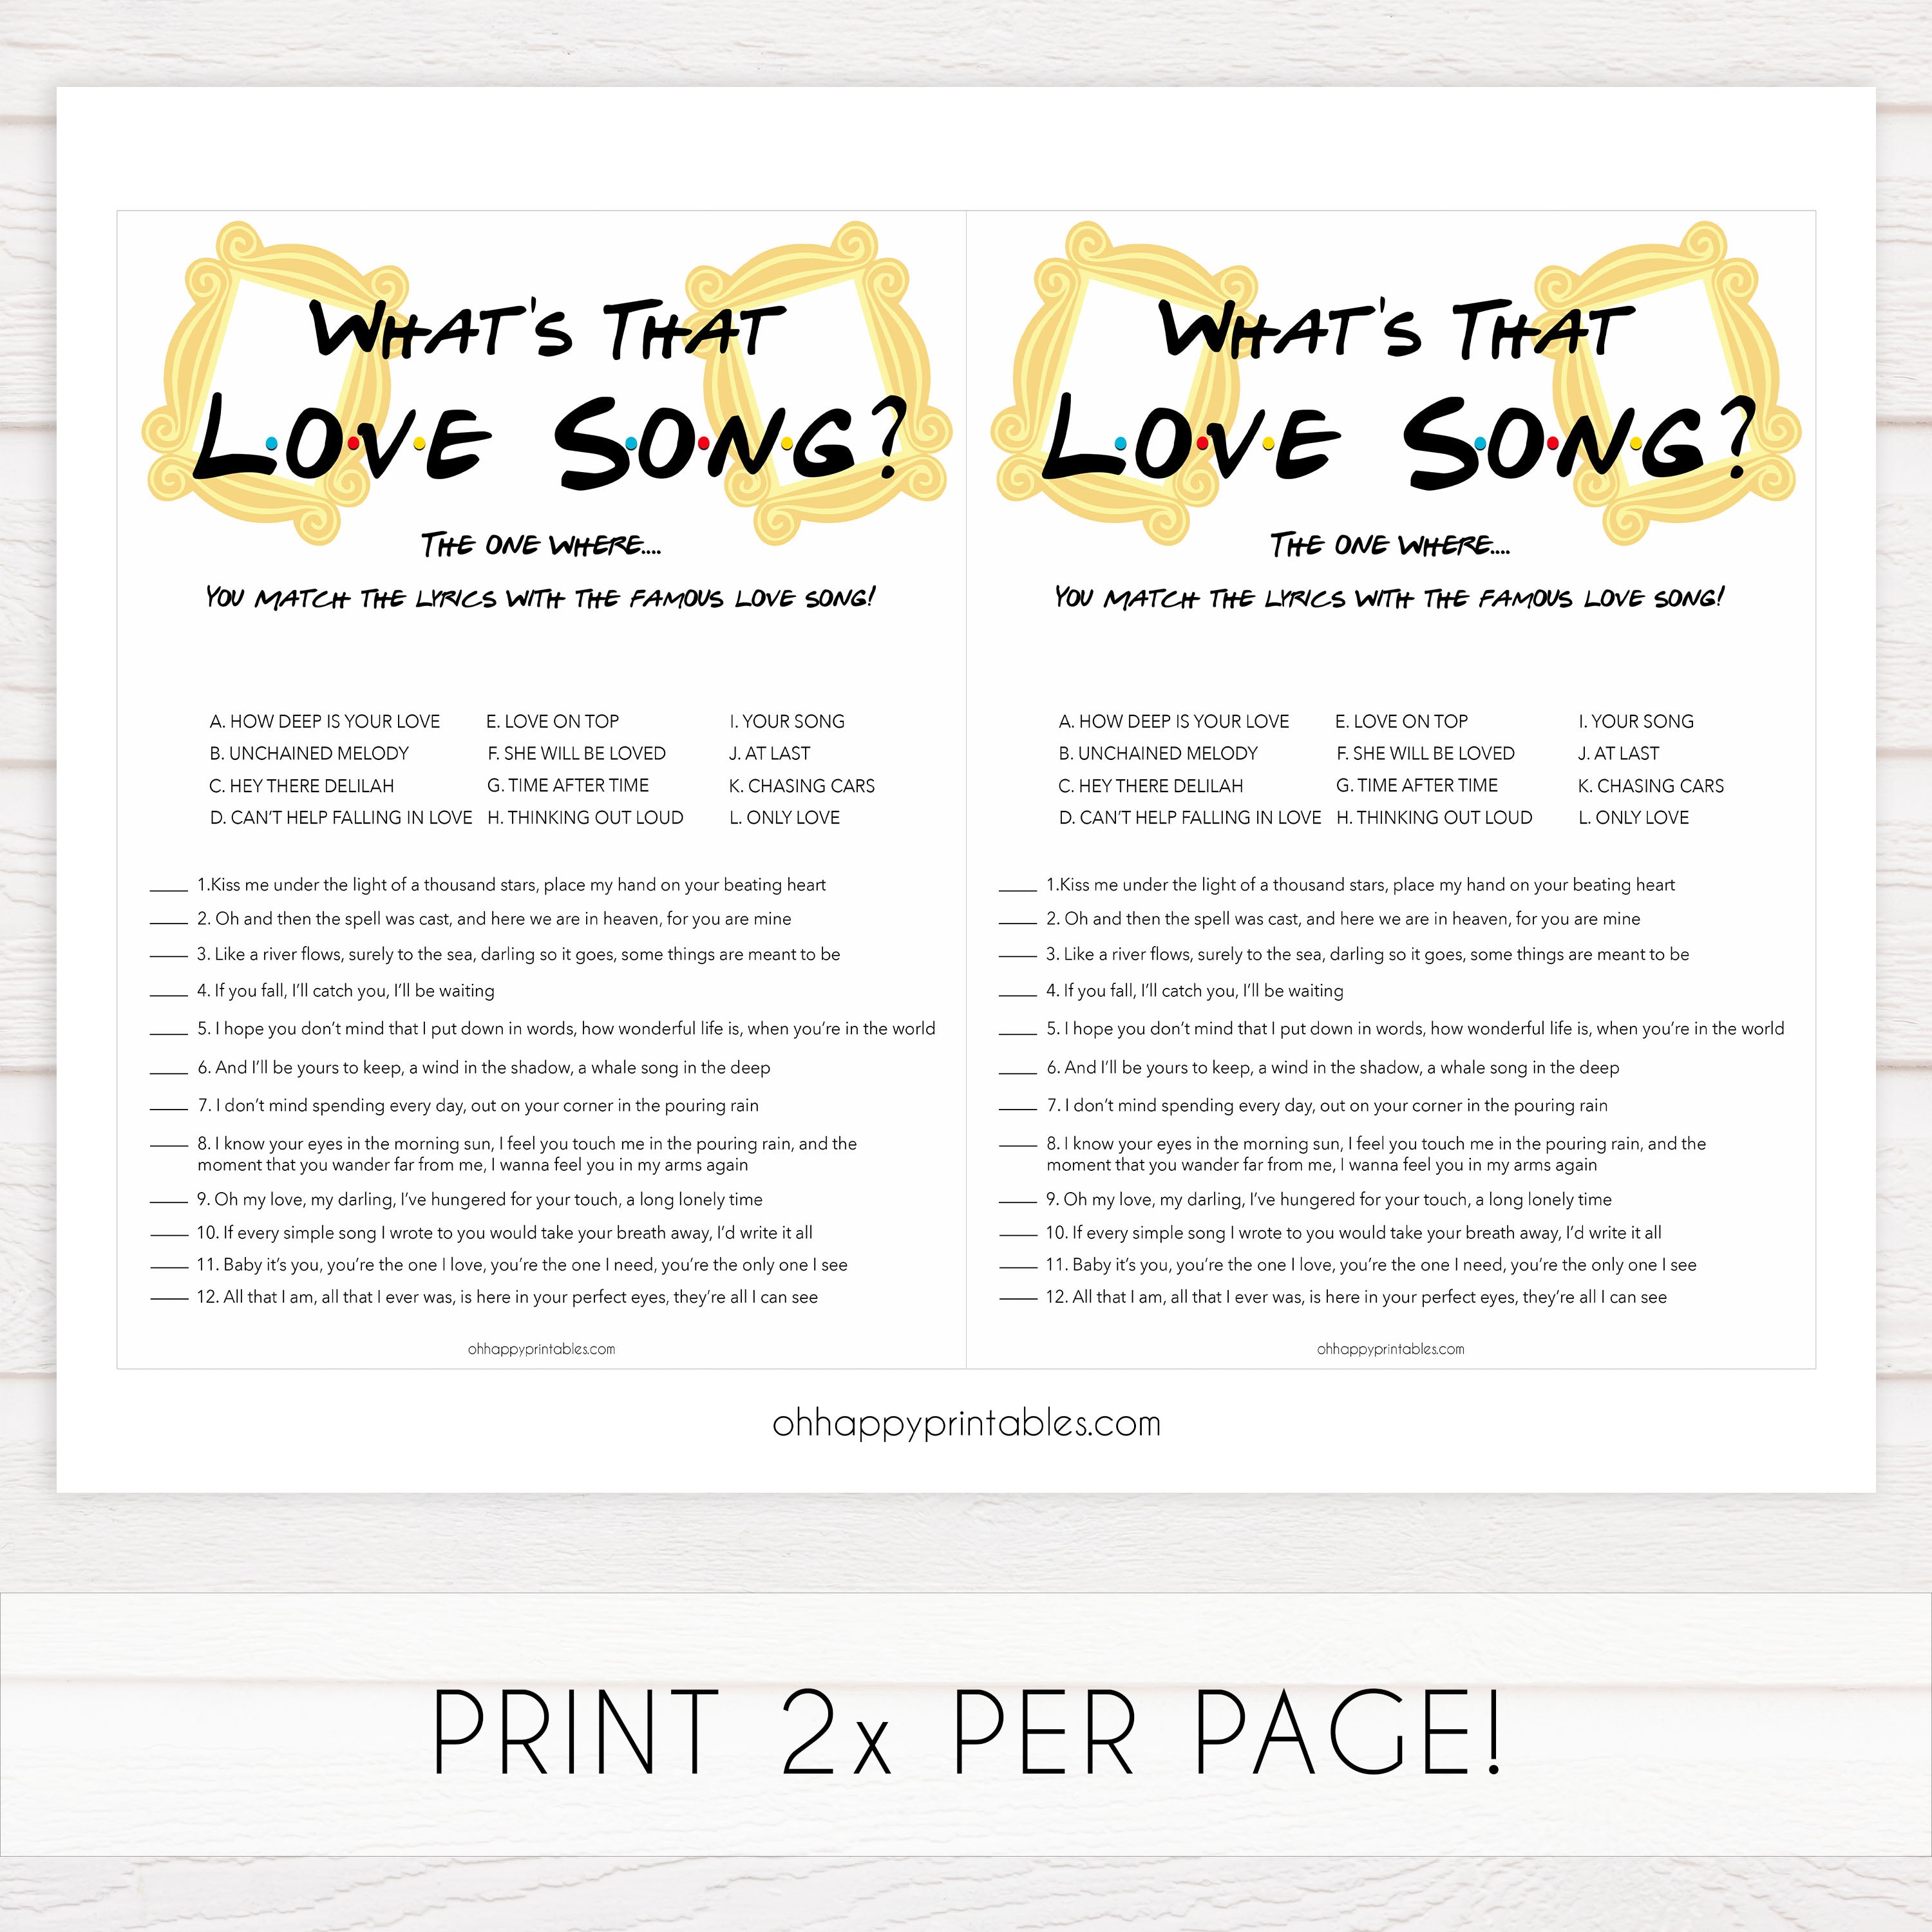 whats that love song game, love song guessing game, Printable bridal shower games, friends bridal shower, friends bridal shower games, fun bridal shower games, bridal shower game ideas, friends bridal shower